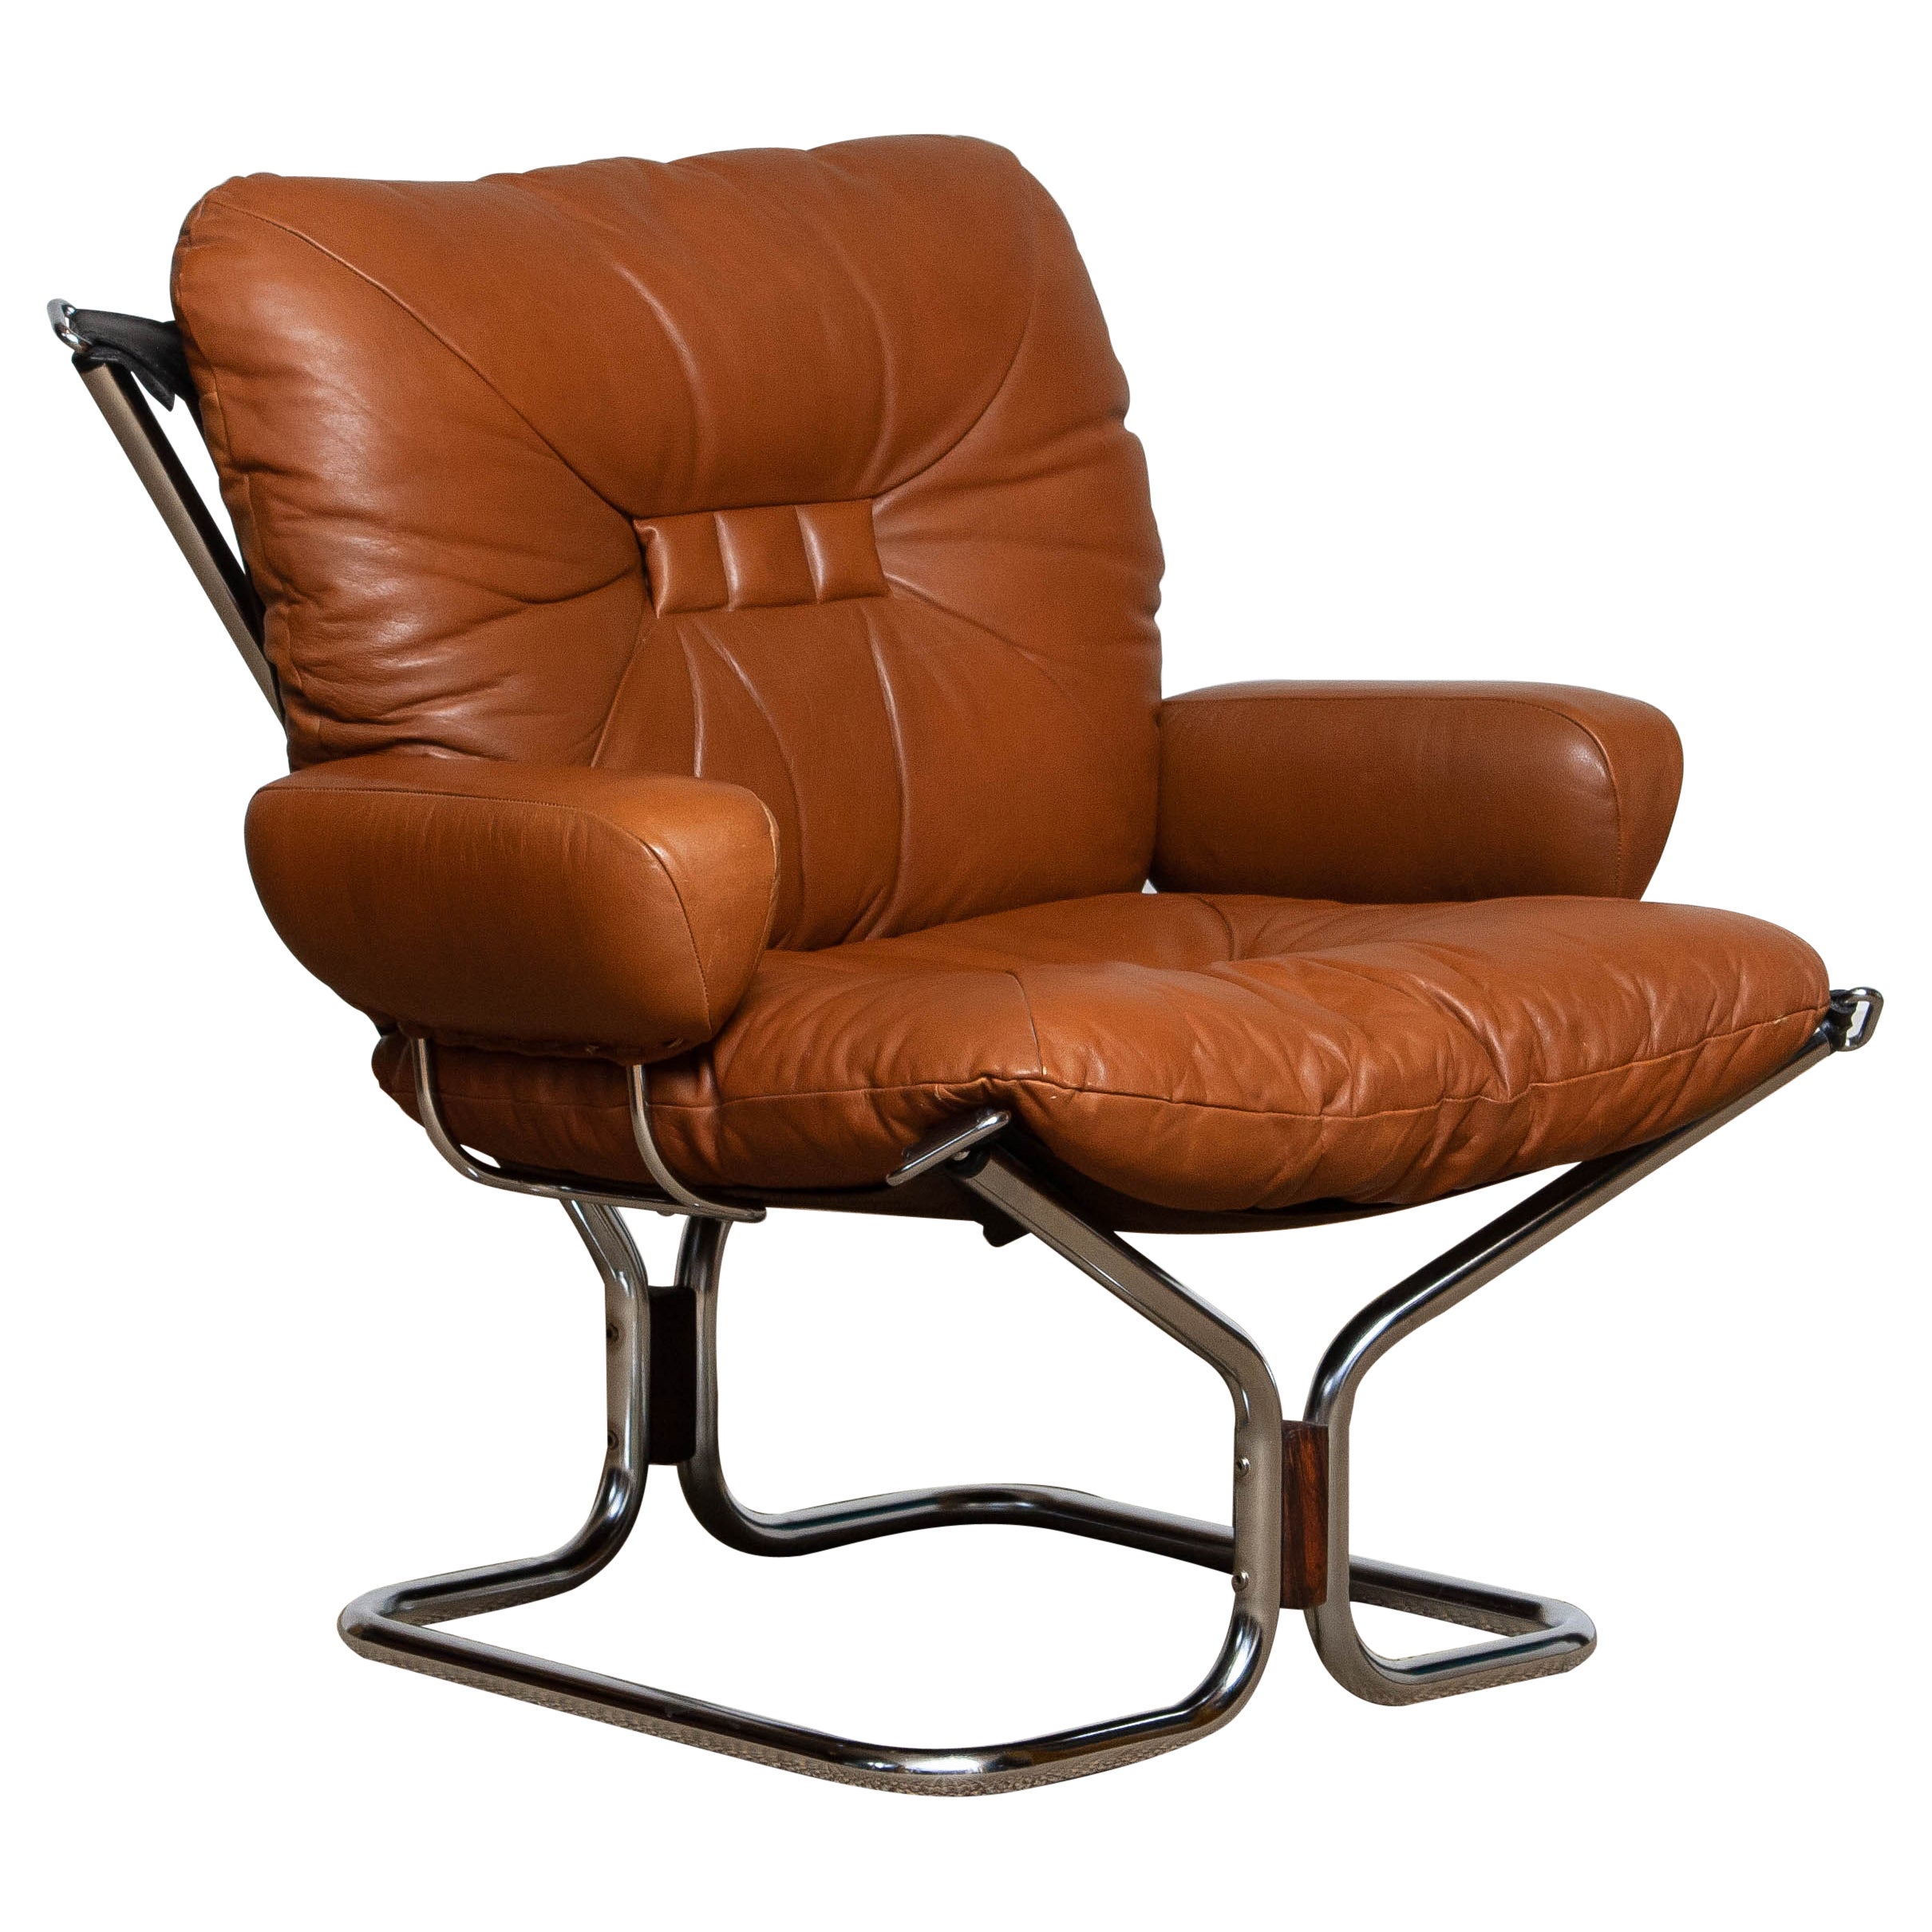 1970's Cognac Leather and Chrome Lounge Chair by Harald Relling for Westnofa